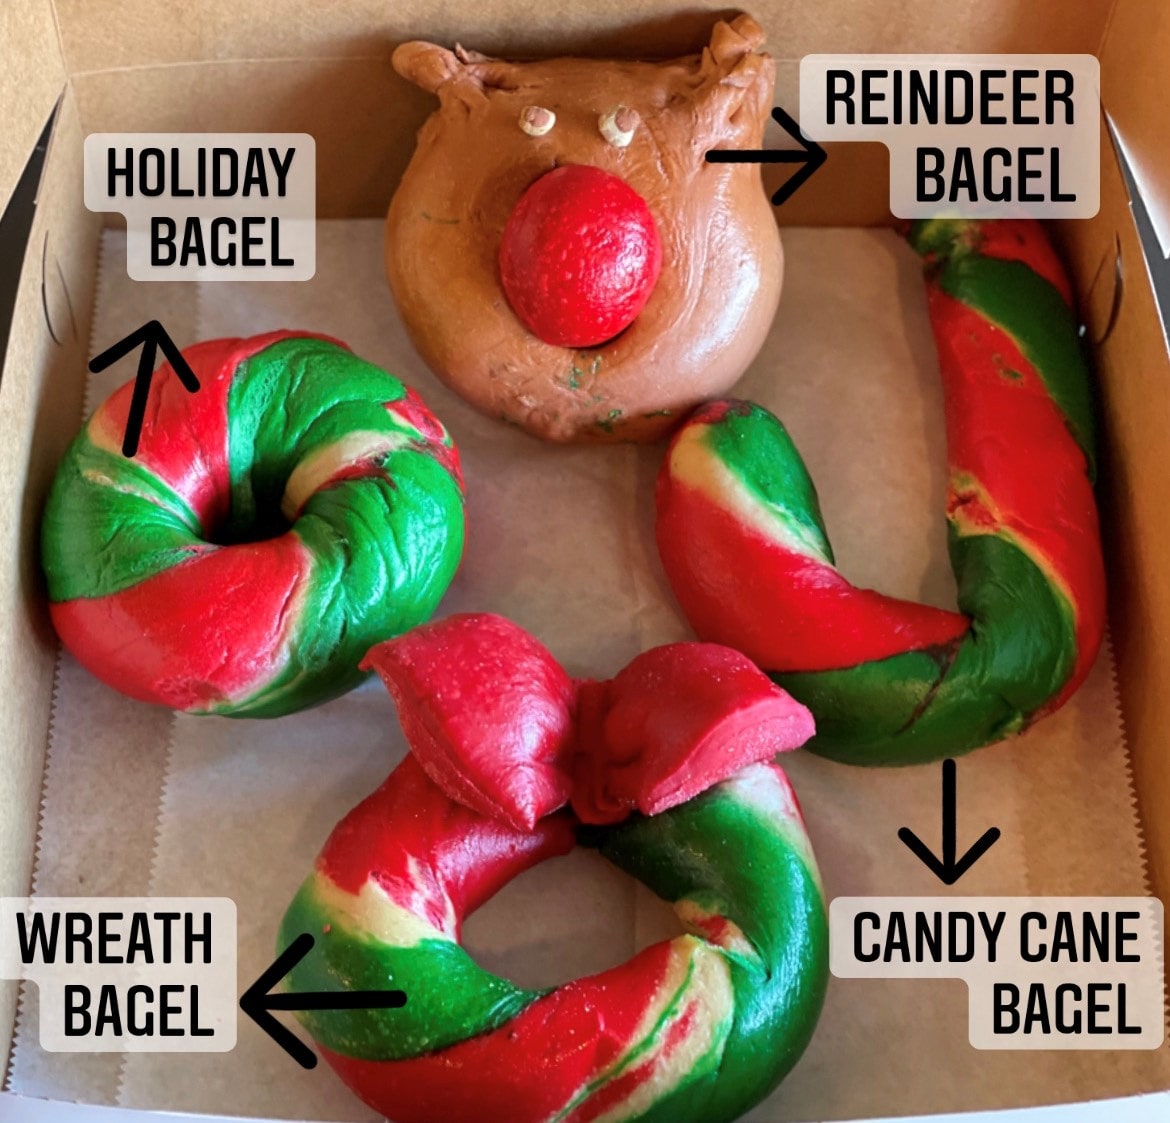 H-All-in-one Holiday Bagel Gift Box